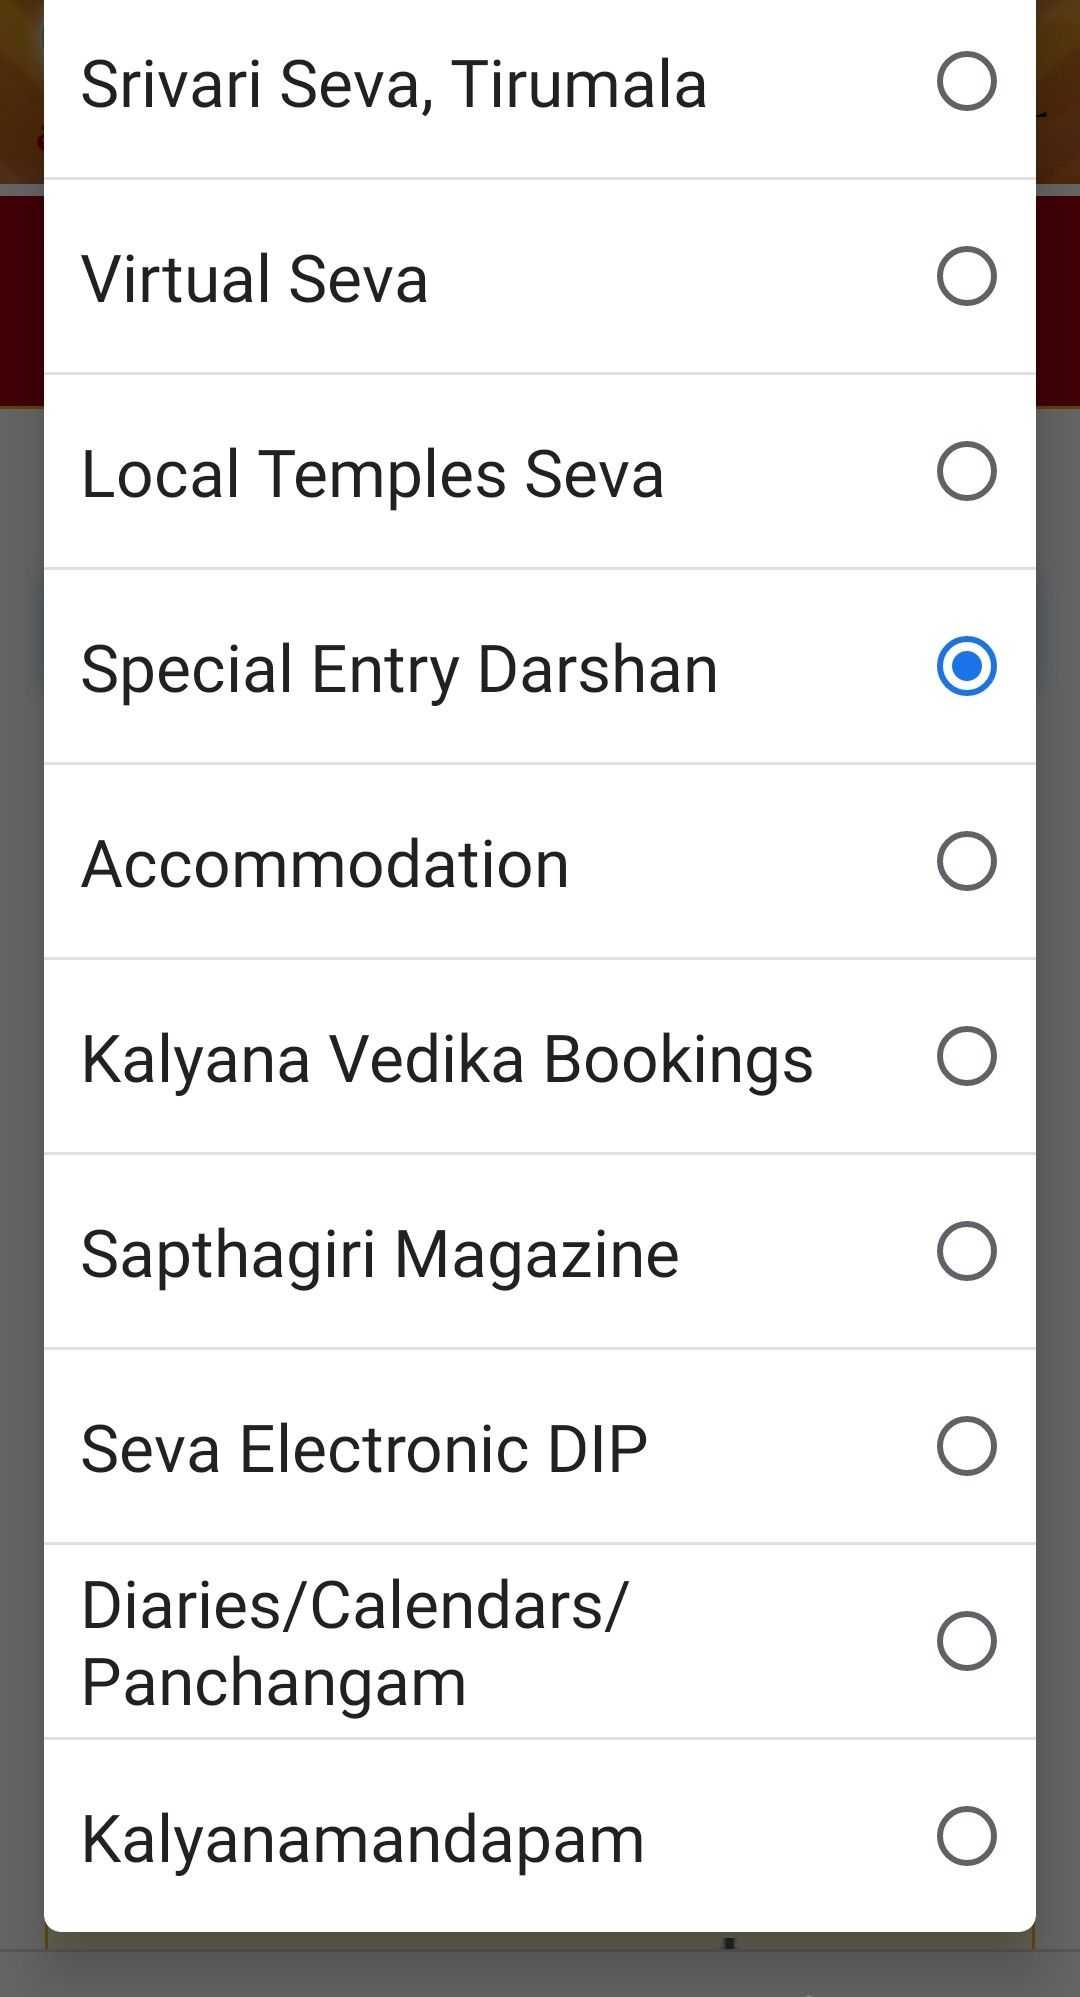 Go to ‘Transaction History’ and select ‘Special Entry Darshan’ from drop down